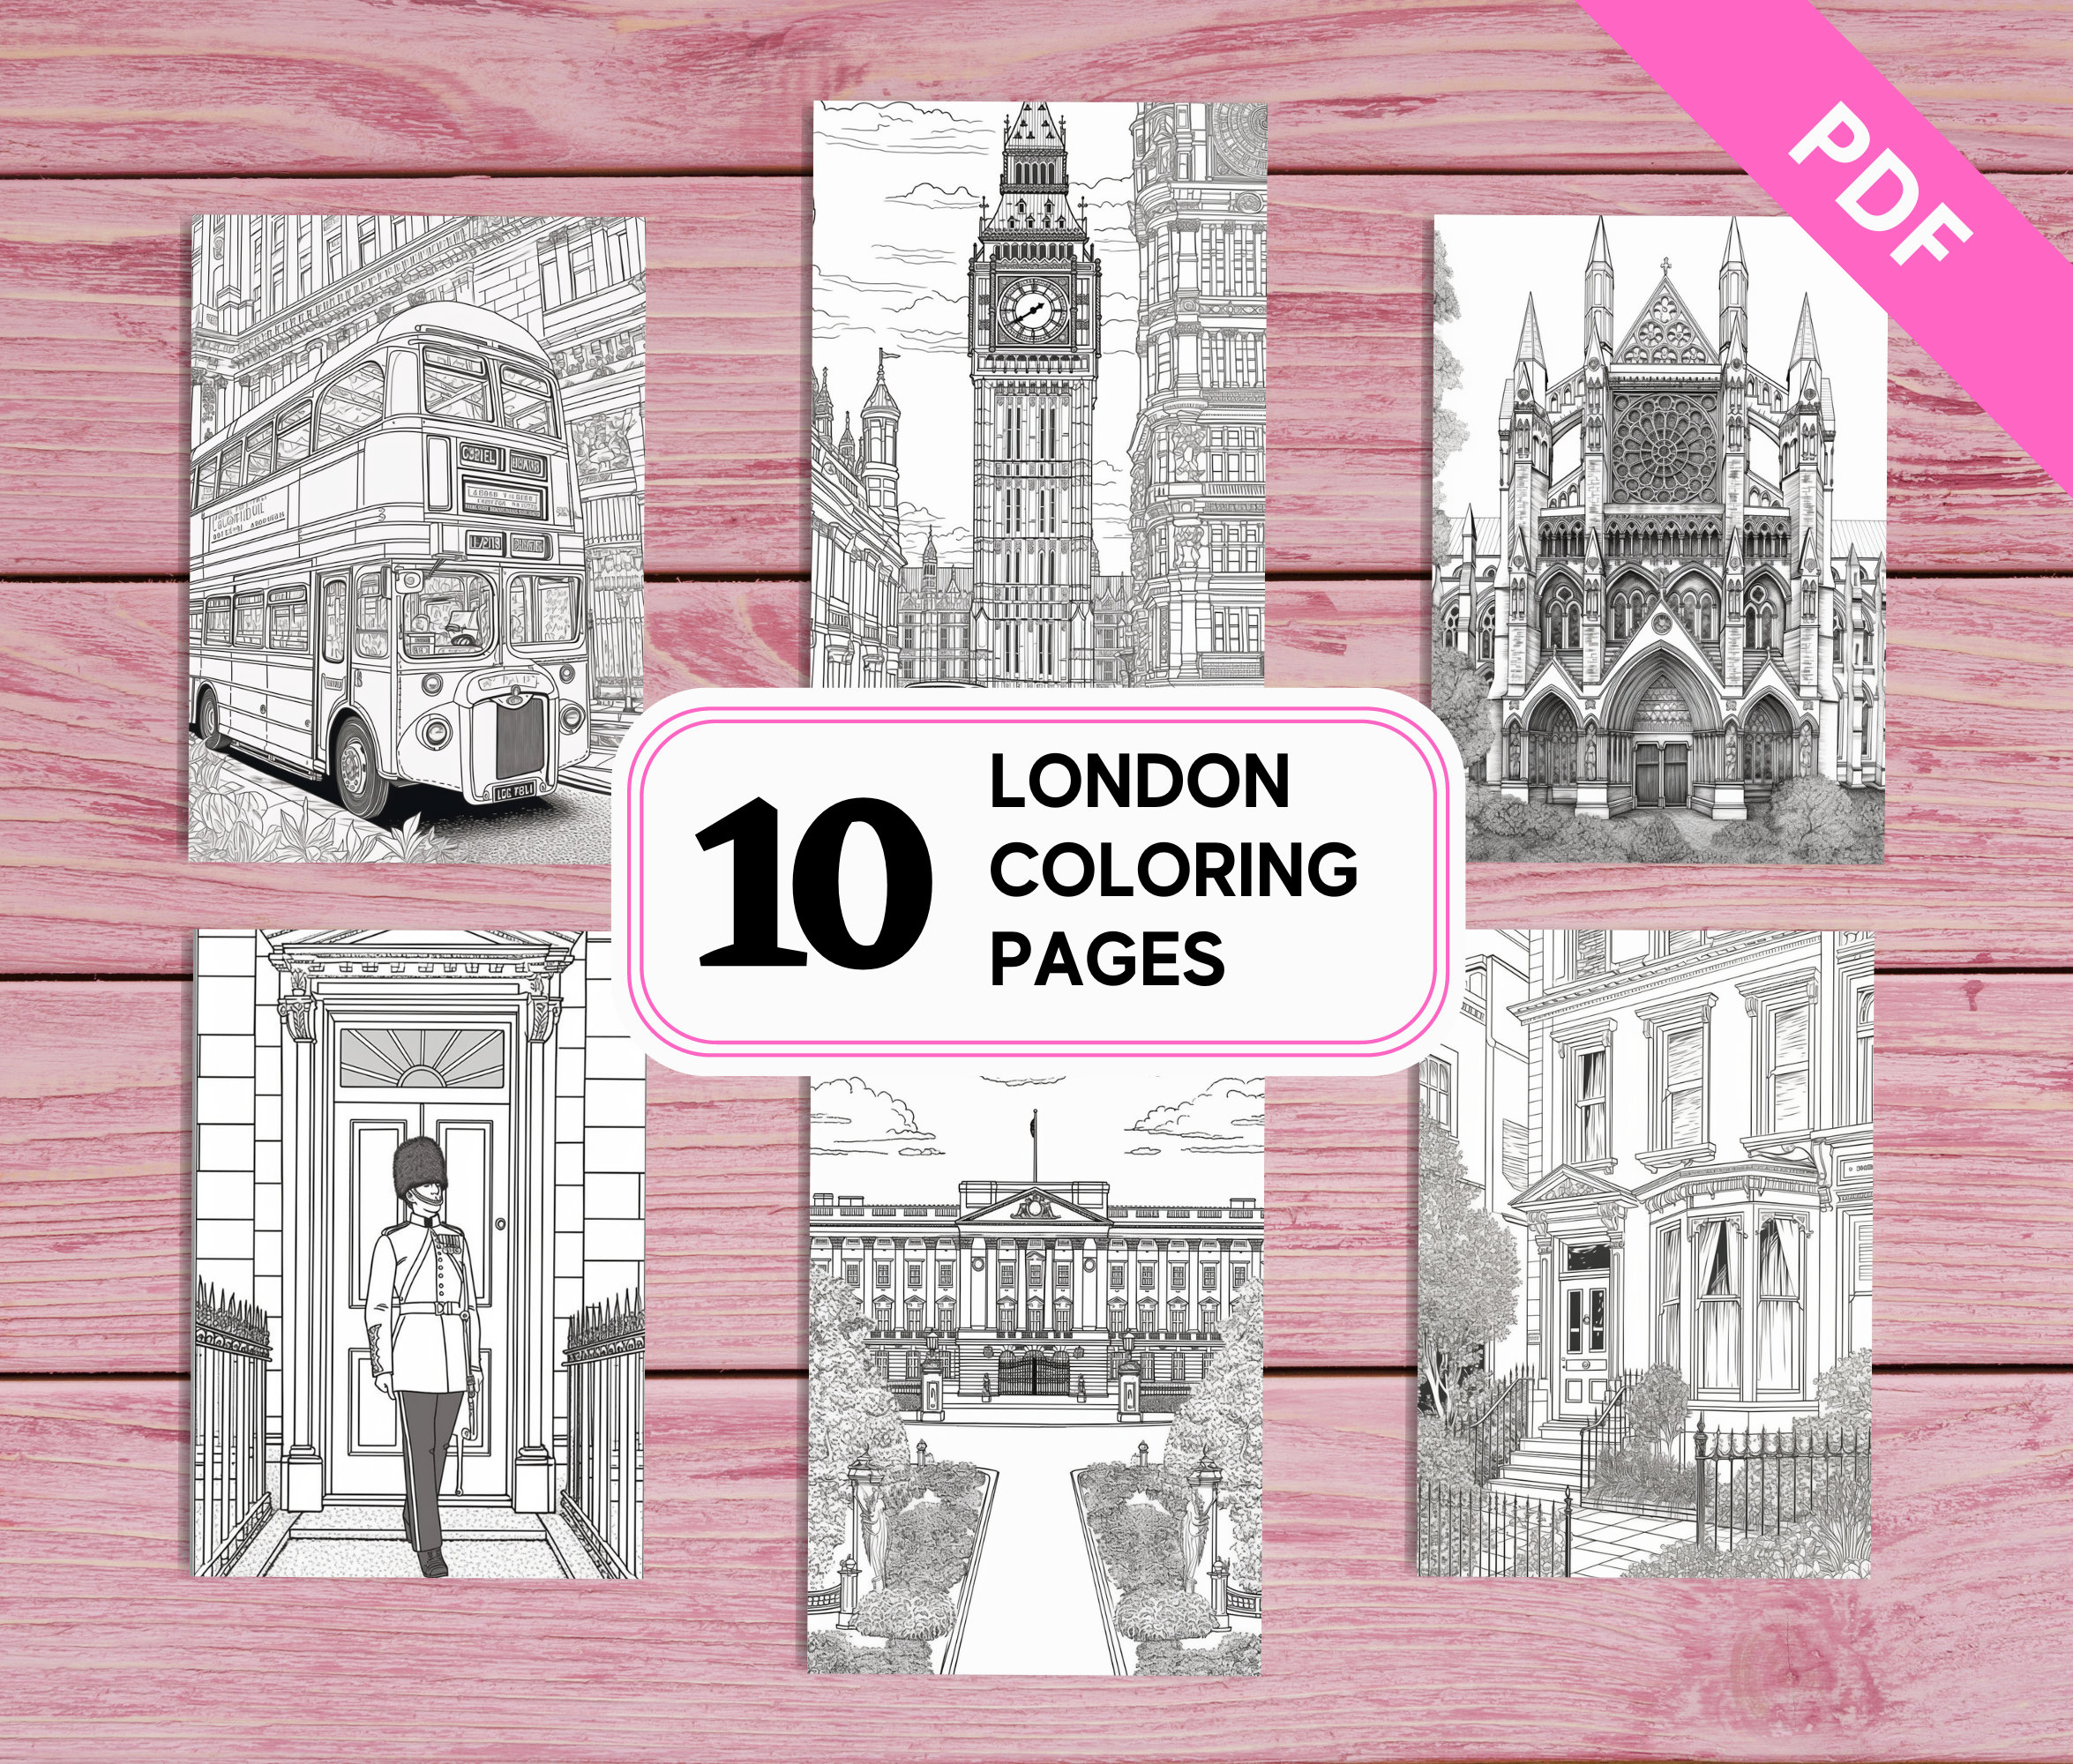 London city coloring pages for adults printable pdf a instant download for uk lovers unique designs english colouring